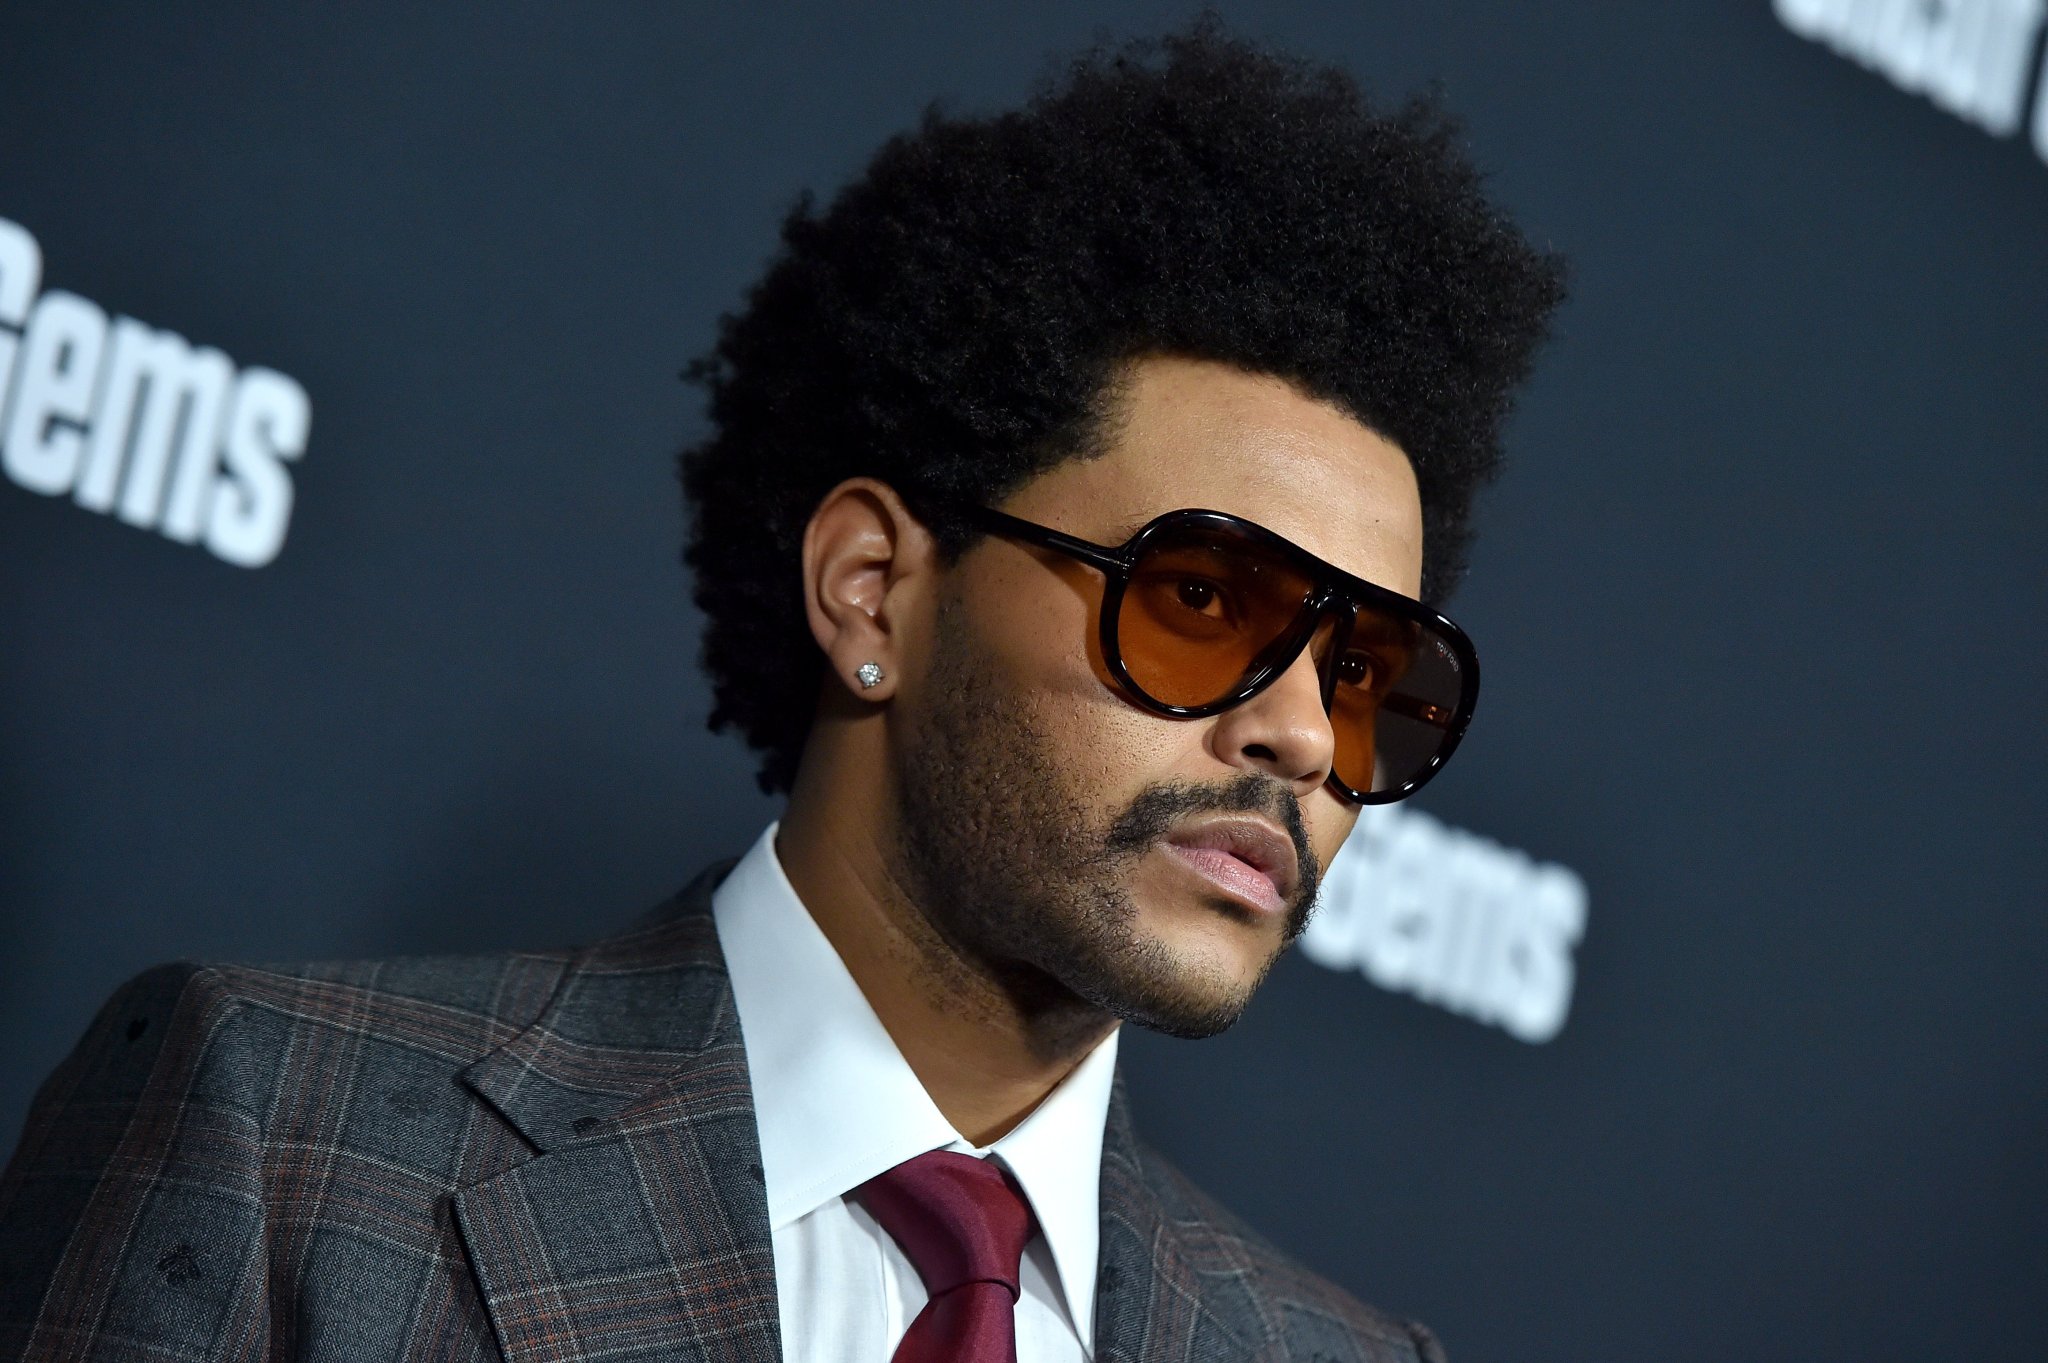 The Weeknd slams the Grammys, calls them 'corrupt' after lack of nominations